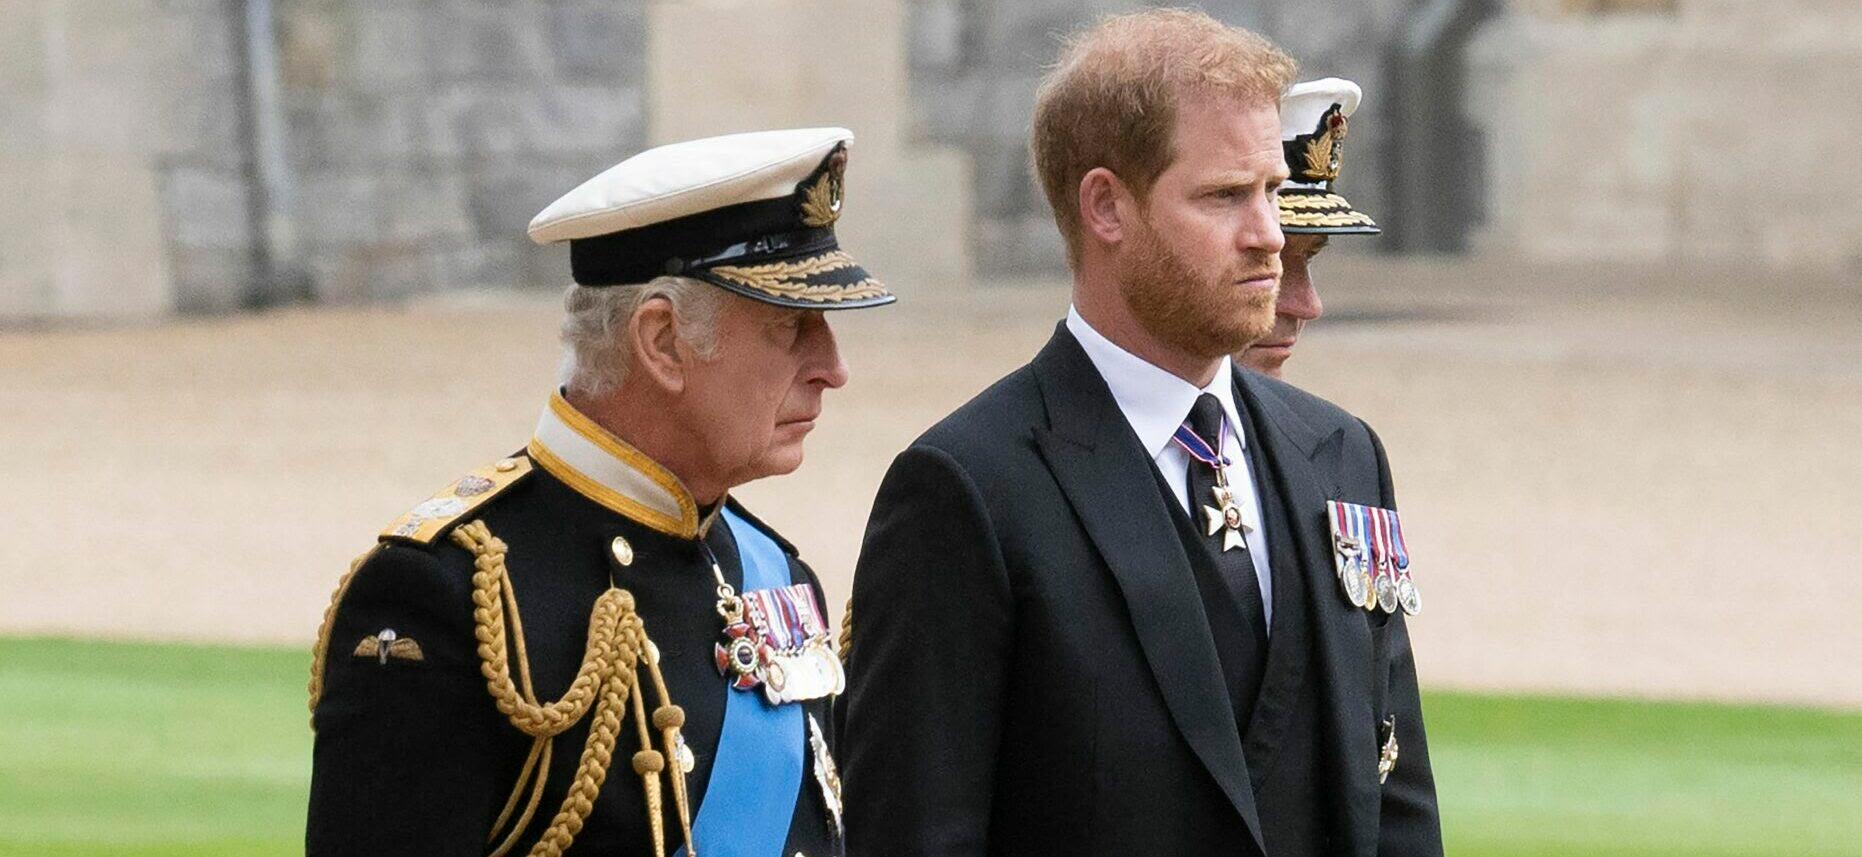 Prince Harry Reportedly Felt 'Deeply Stung' By King Charles' 'Snub' During His UK Trip